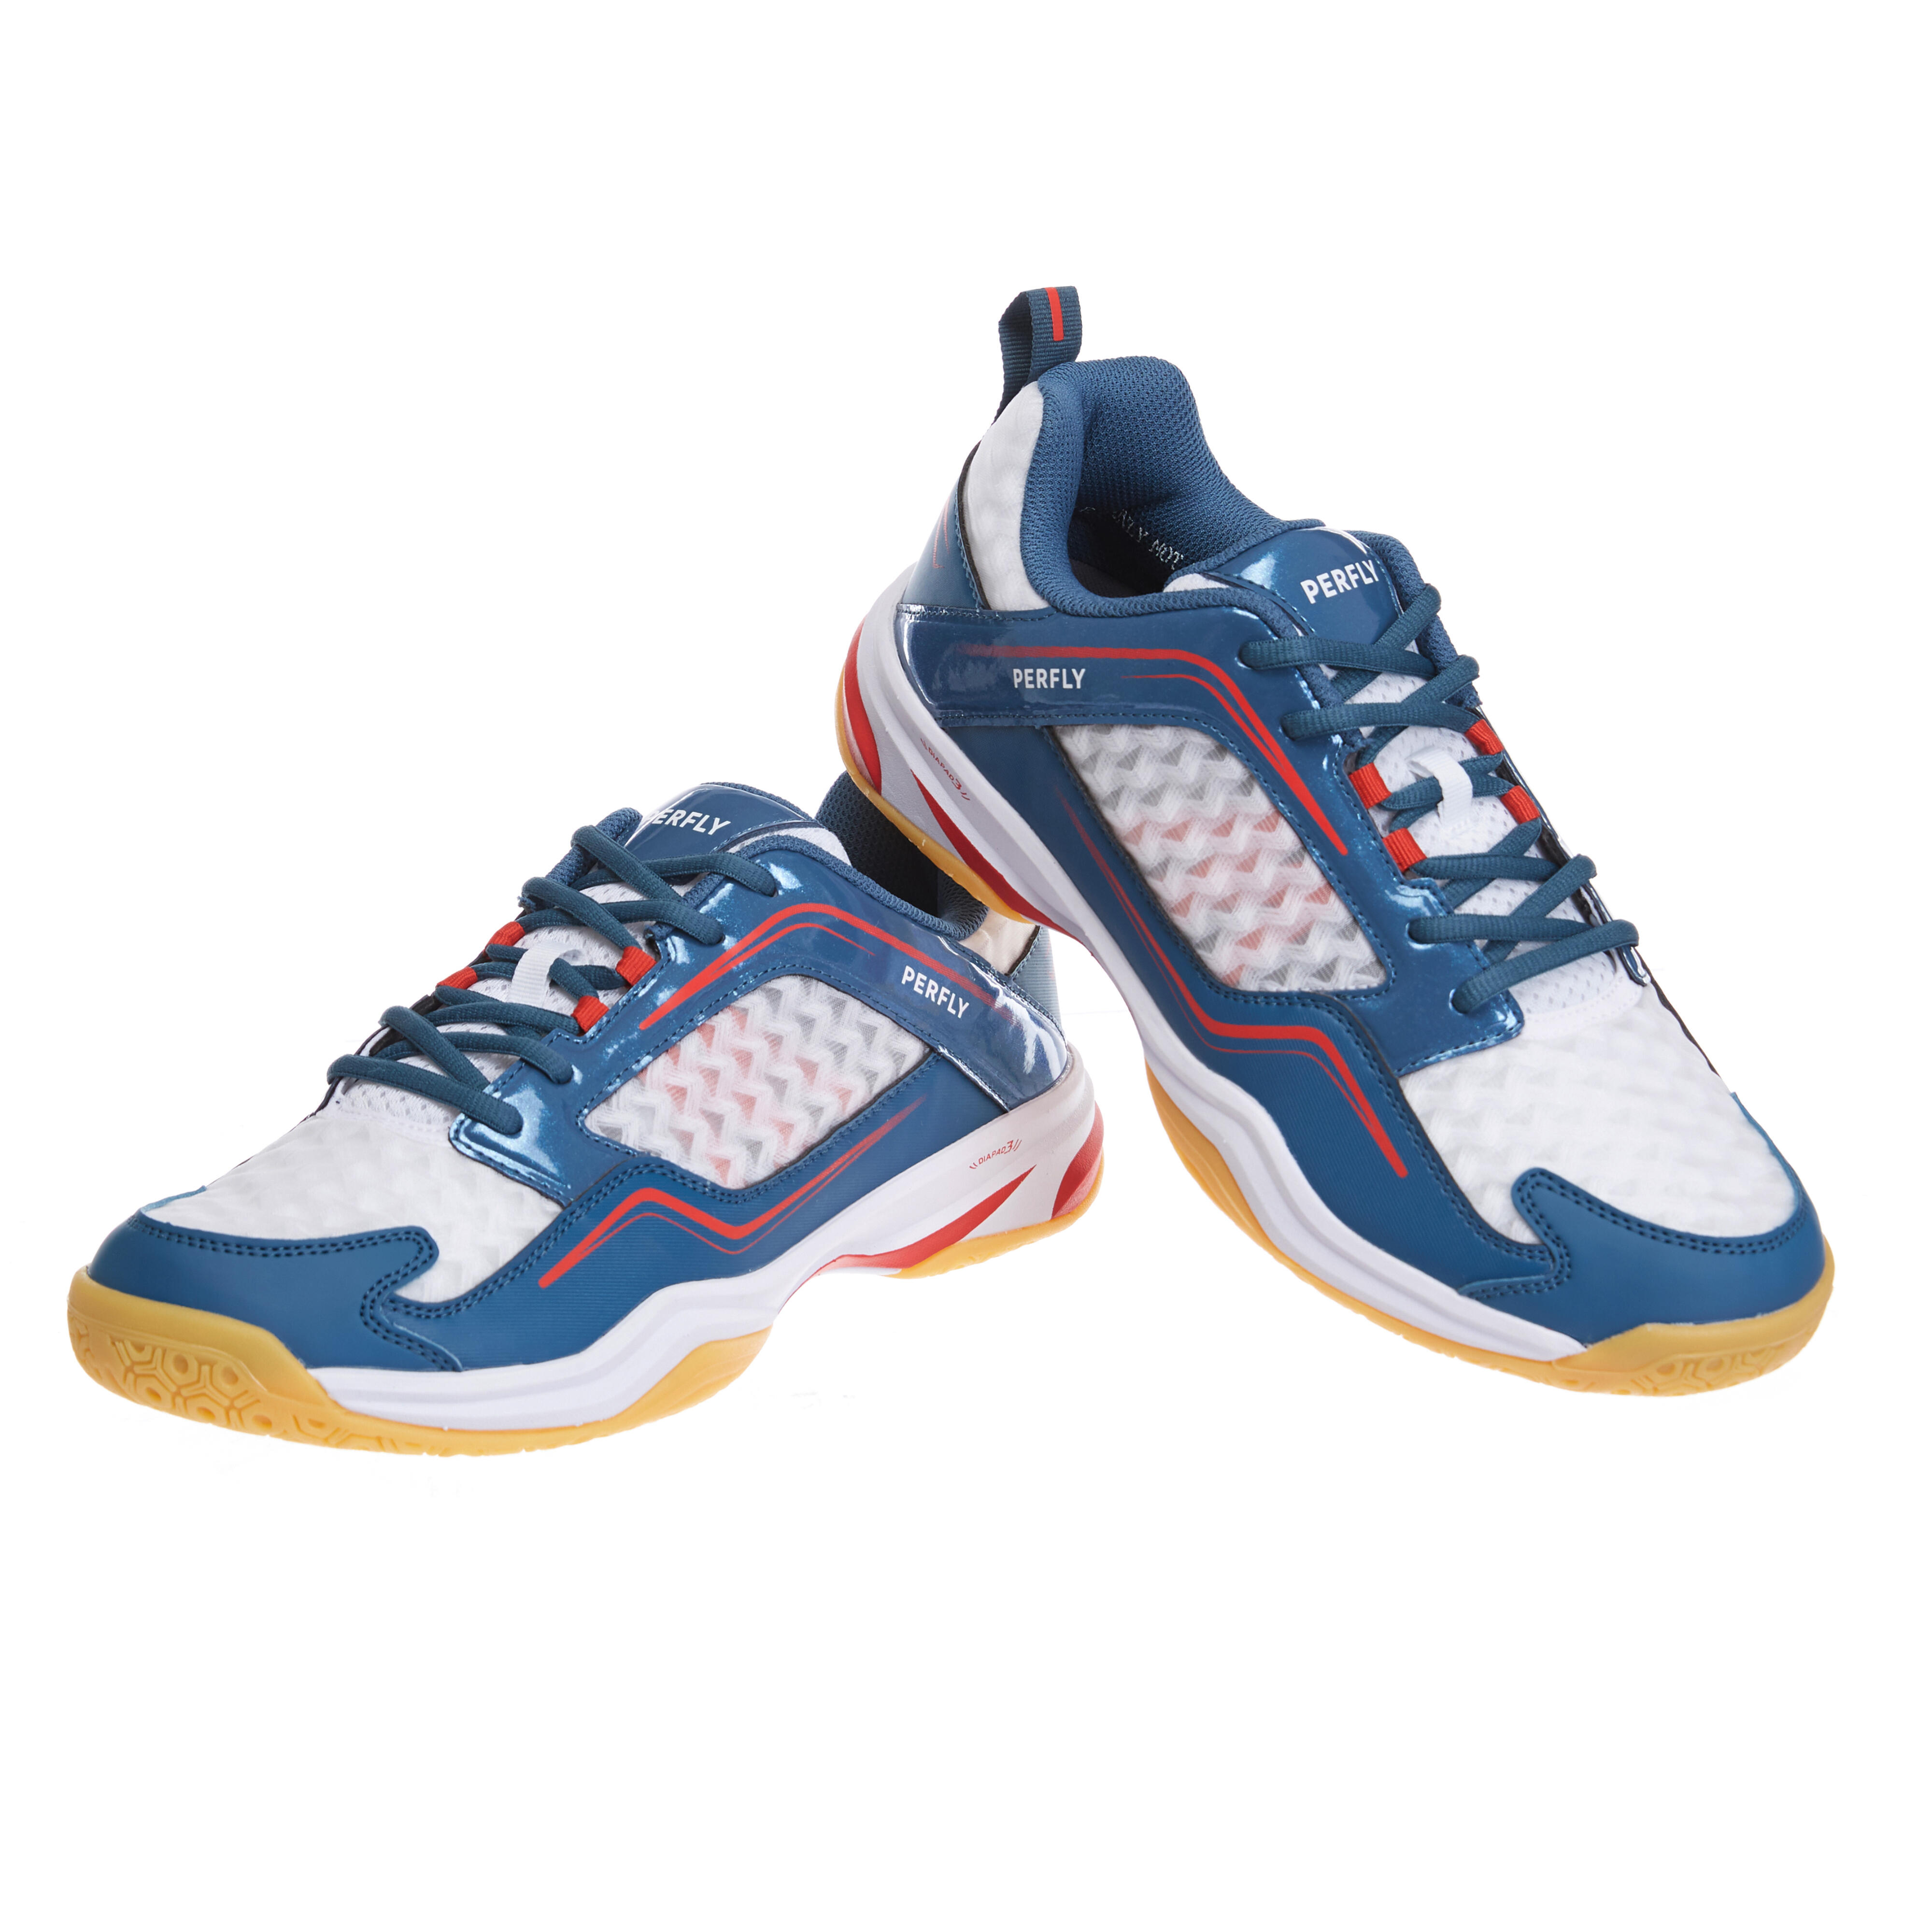 PERFLY by Decathlon Badminton Shoes For Women - Buy PERFLY by Decathlon Badminton  Shoes For Women Online at Best Price - Shop Online for Footwears in India |  Flipkart.com